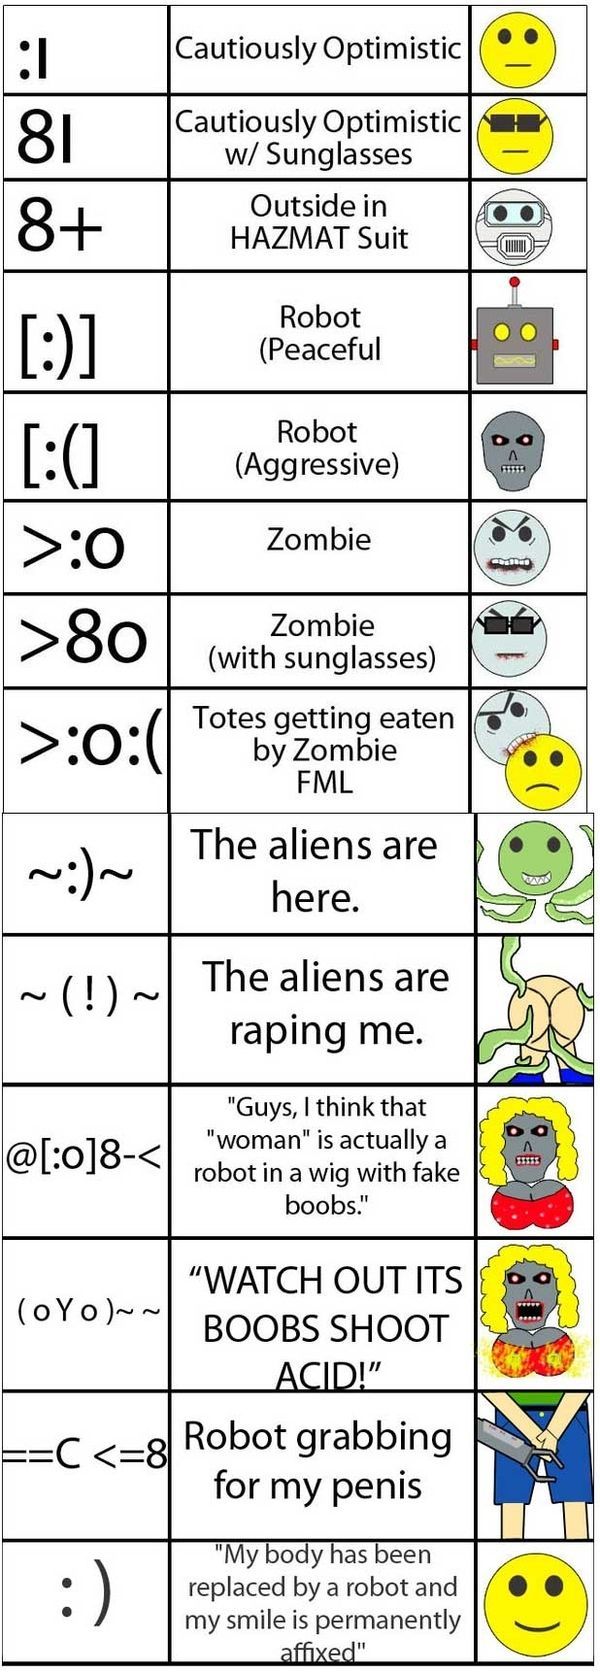 emoticons for facebook - 1 Cautiously Optimistic 81 Cautiously Optimistic w Sunglasses Outside in Hazmat Suit Robot Peaceful 8 >0 >80 Robot Aggressive Zombie Zombie with sunglasses >0 Totes getting eaten by Zombie Fml The aliens are here. The aliens are r